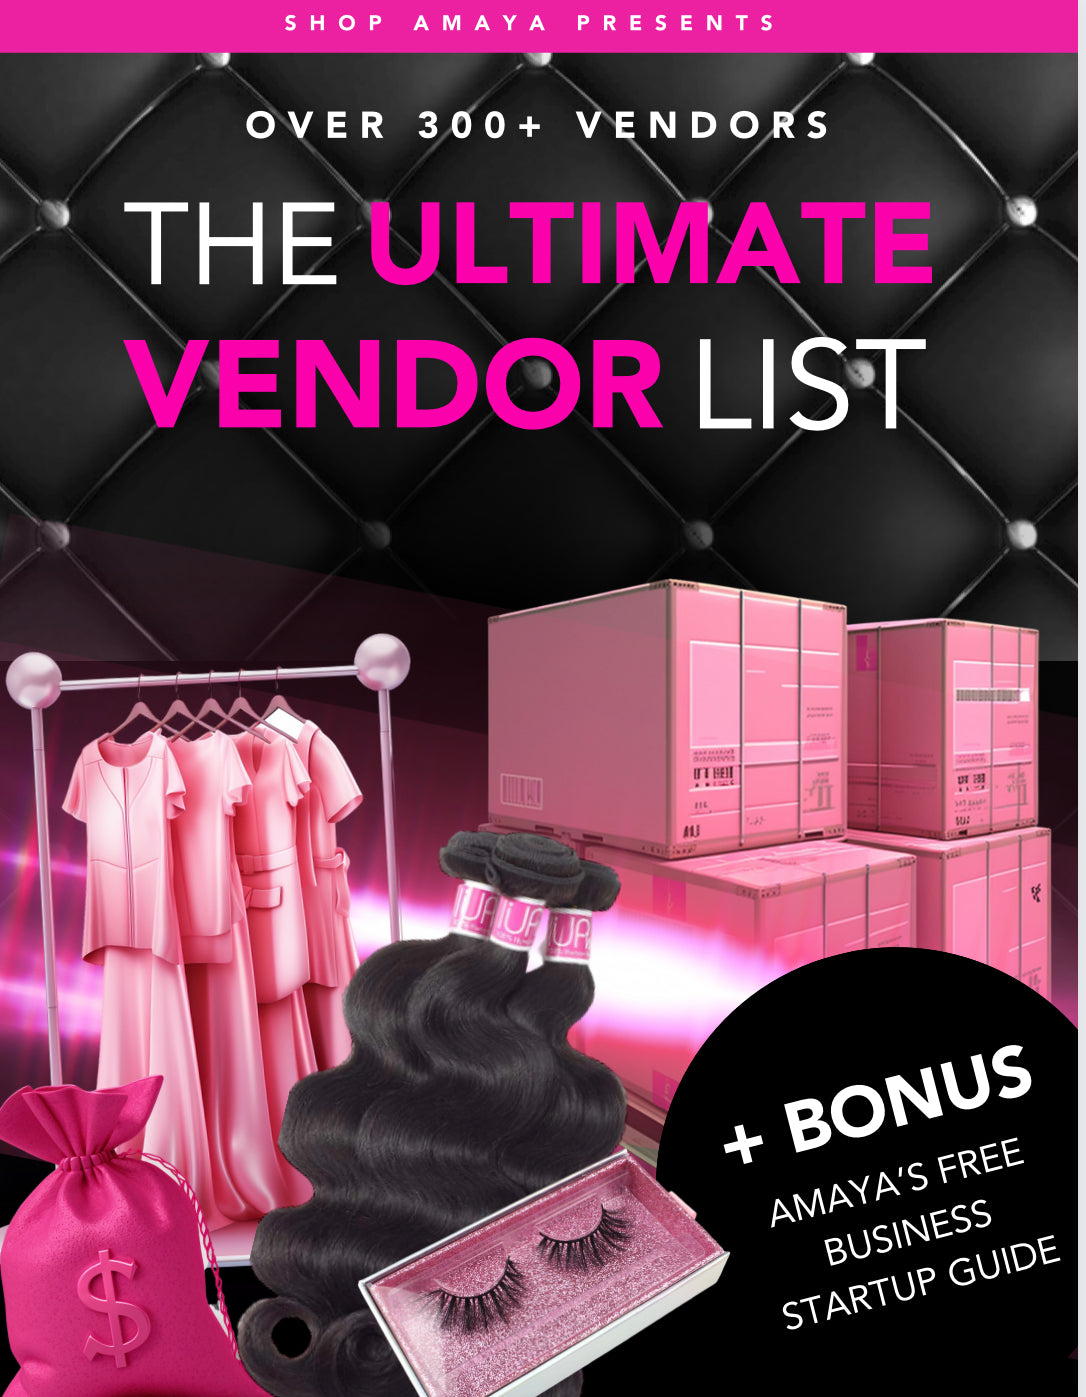 The Ultimate Vendor List + Business Startup Guide